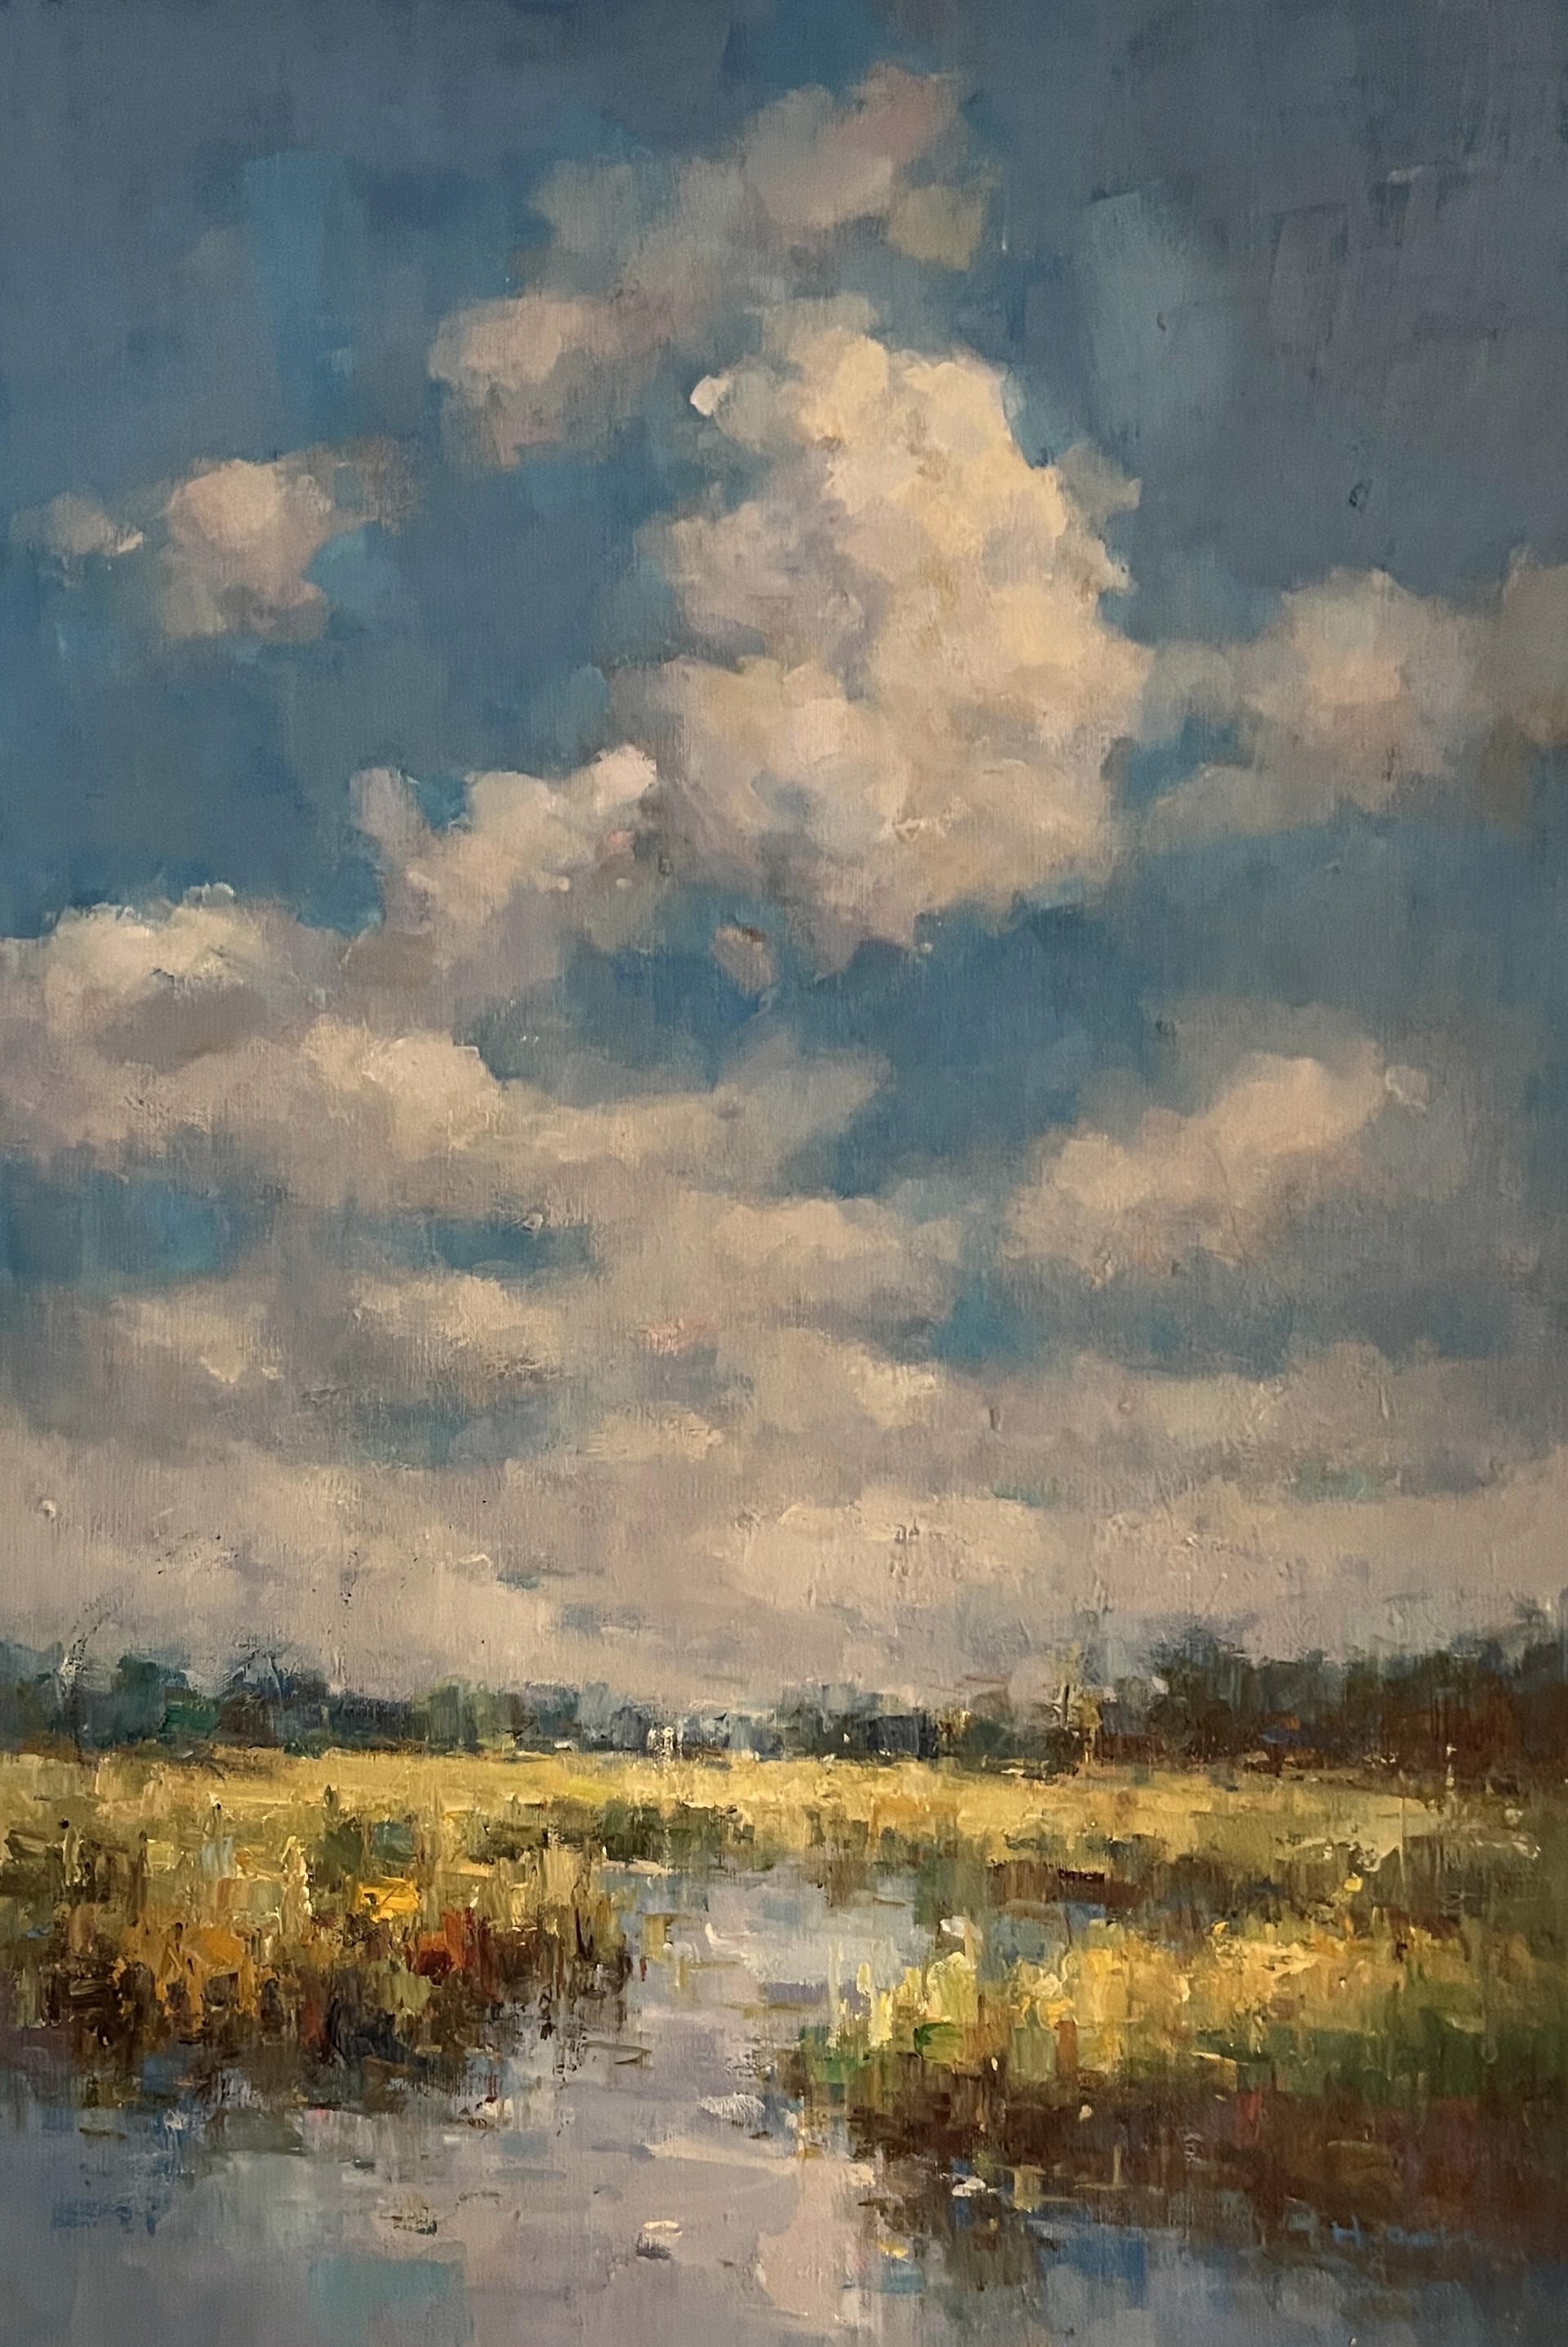 CLOUDS PASSING BY by H COLE